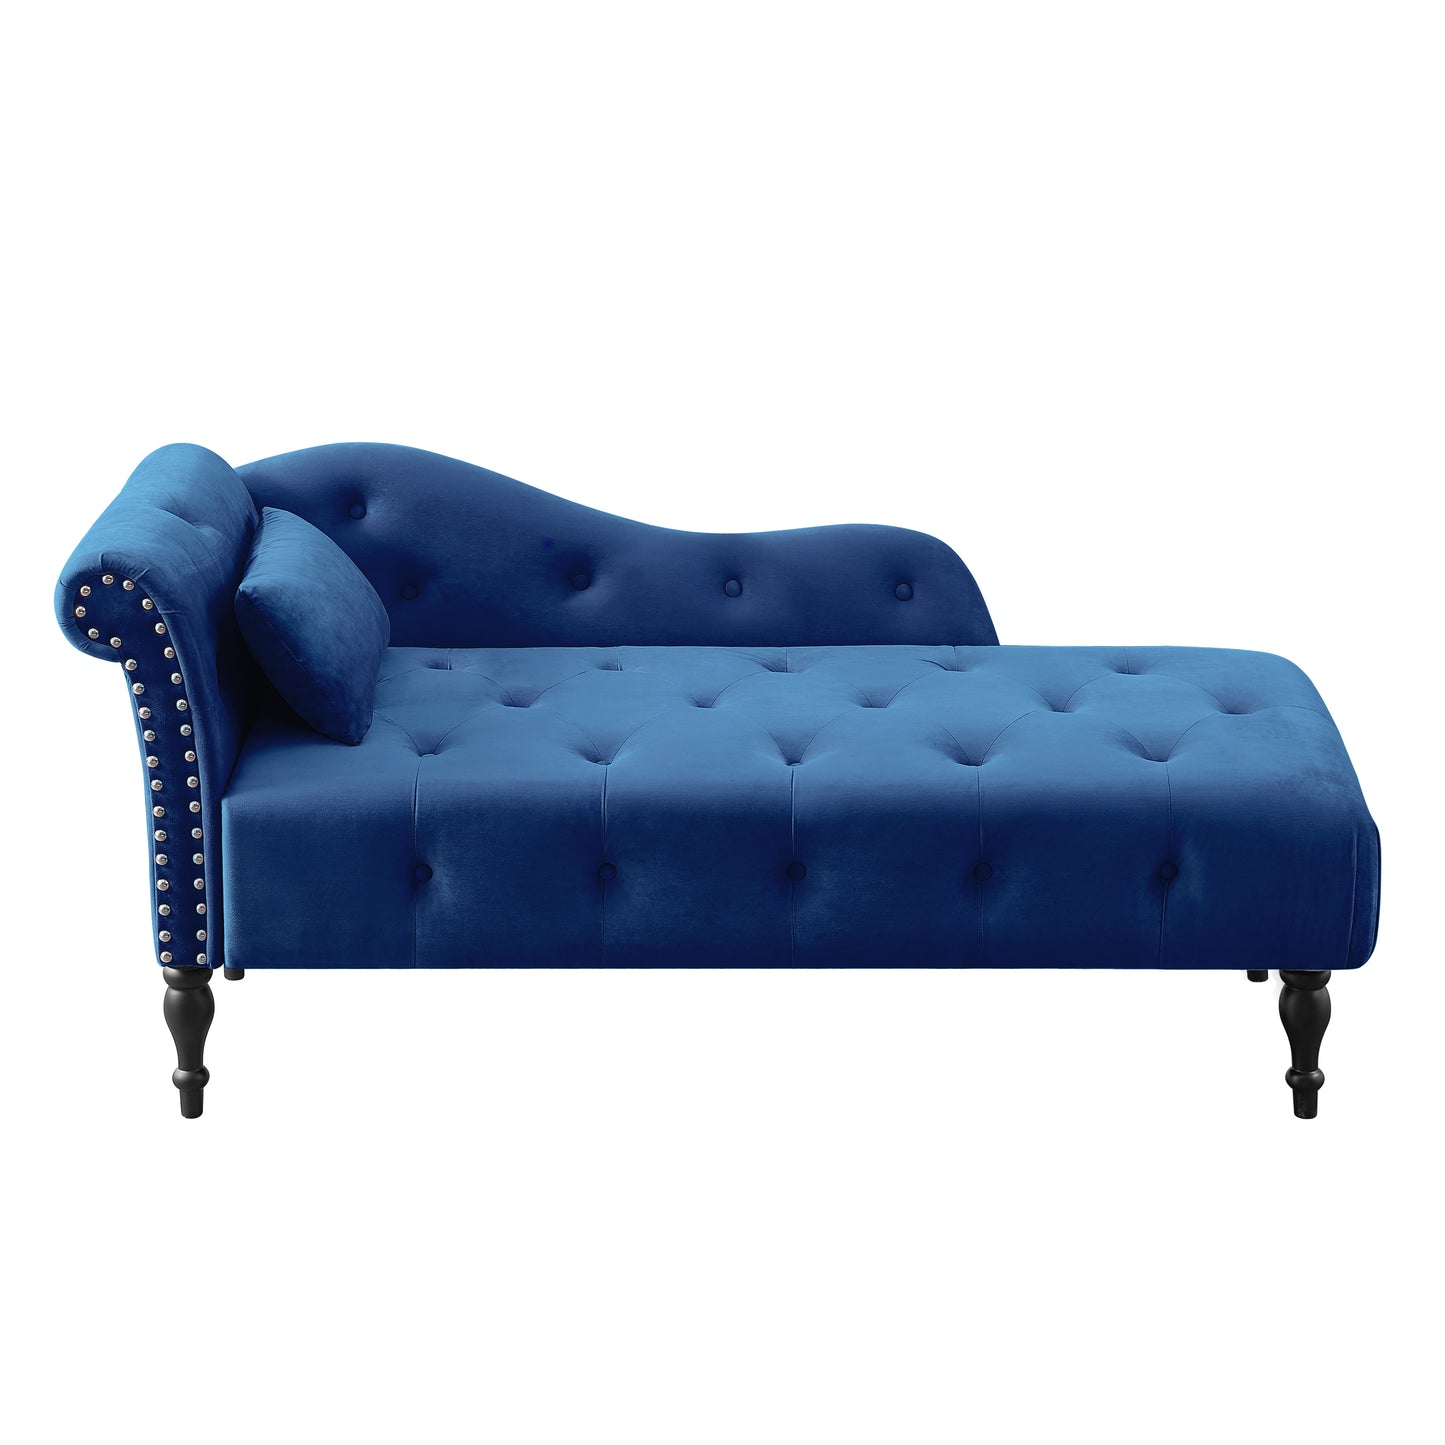 SYNGAR Tufted Upholstered Velvet Rolled Arm Chaise Lounges Indoor Chair, Right Arm Facing Chaise Lounge with Pillow, Nailhead Trim and Solid Wood Legs for Living Room Bedroom Office, Blue